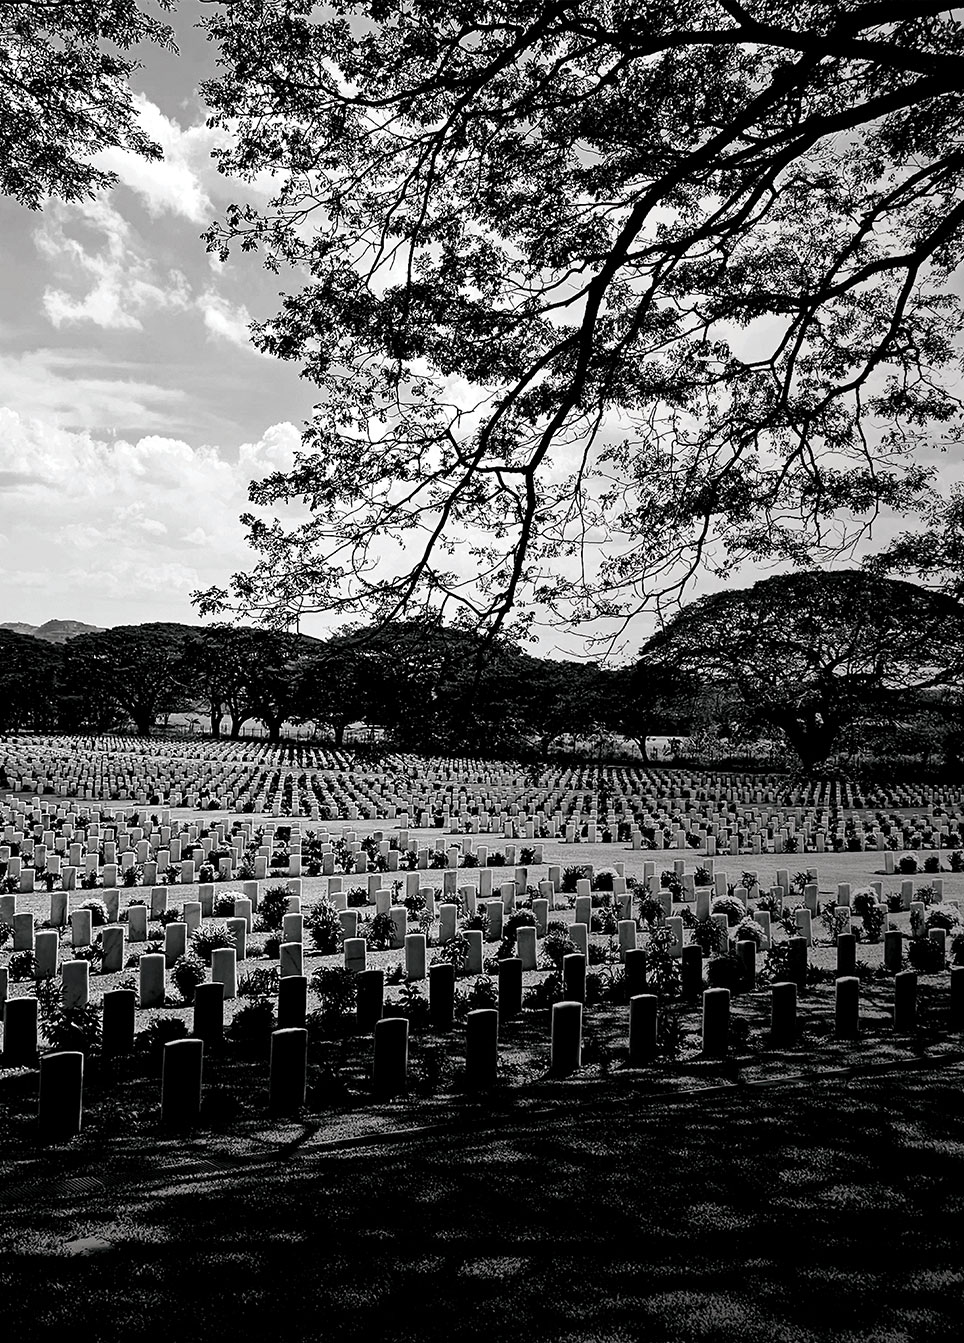 Black and white image of military cemetery with rows of white gravestones.  